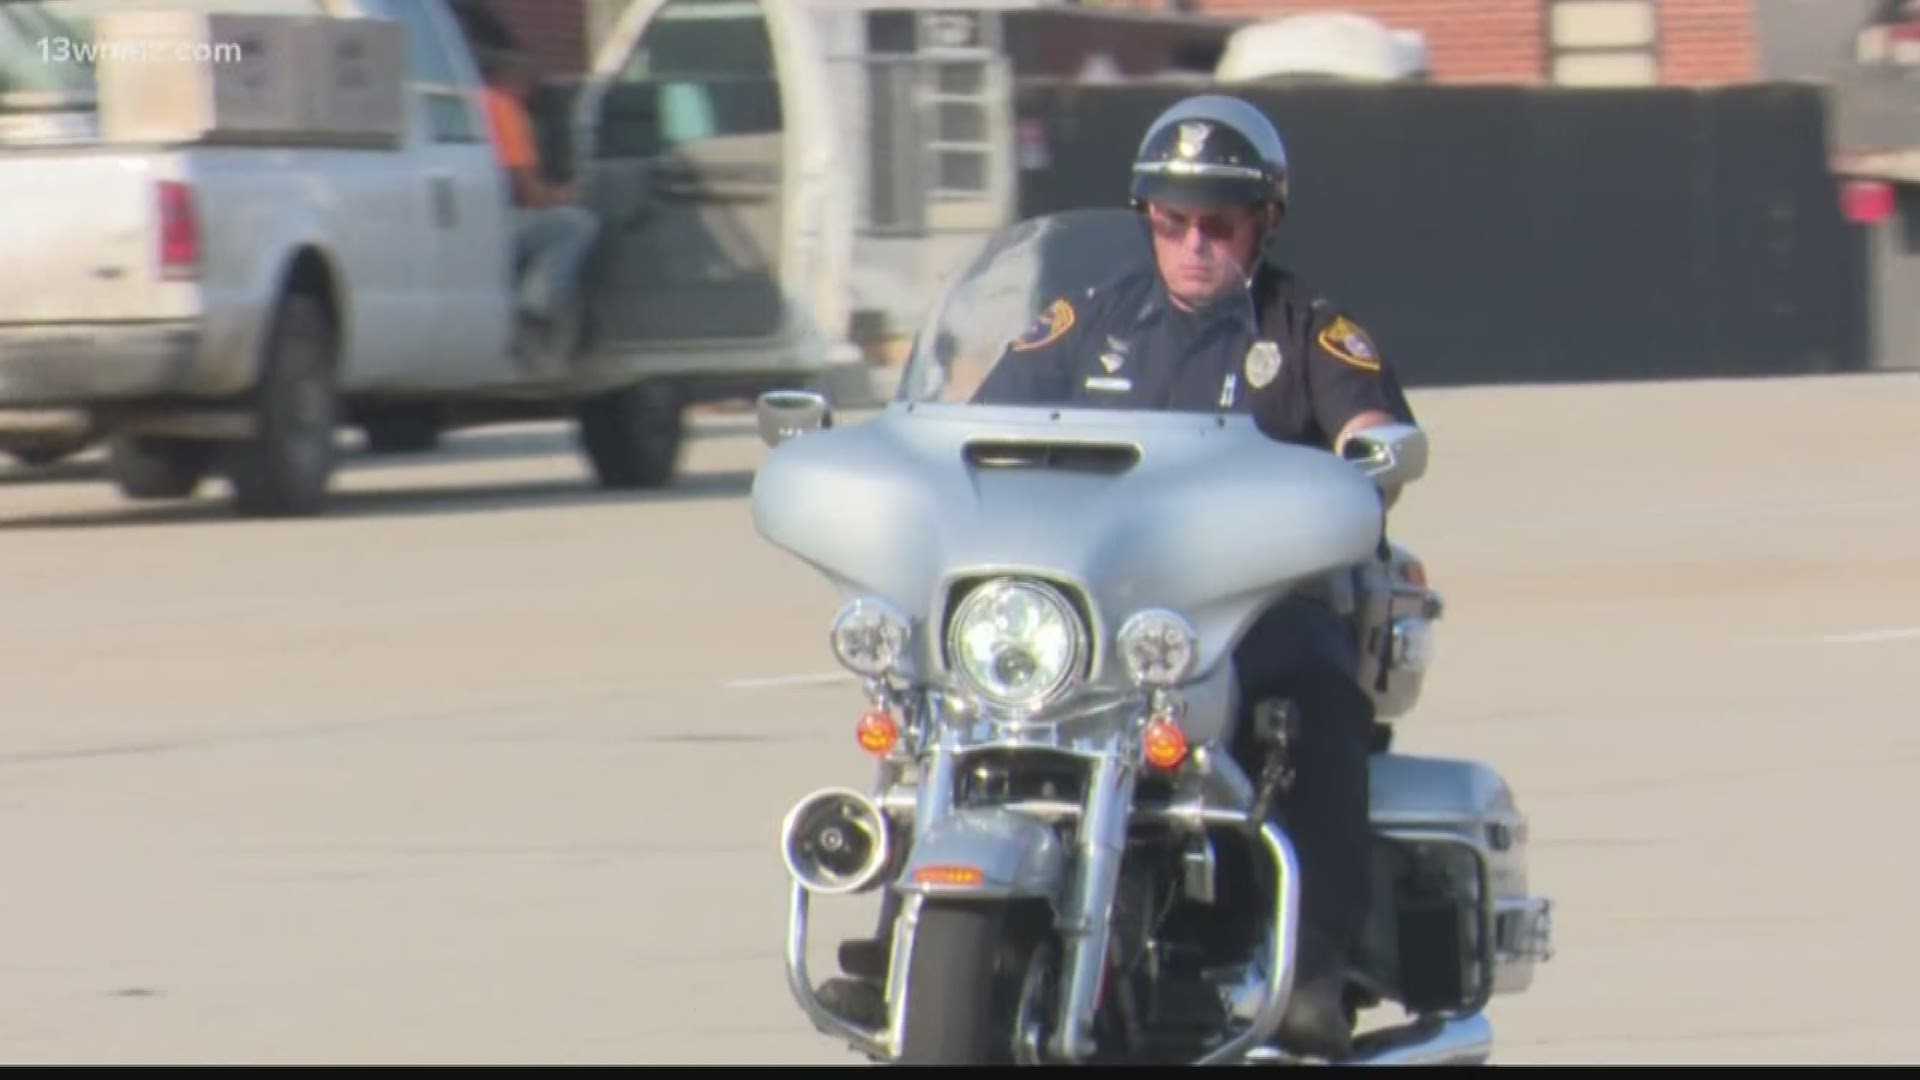 Motorcycles are involved in 11 percent of all accidents on the road. 1 police officer in Warner Robins wants to make the roads safer.